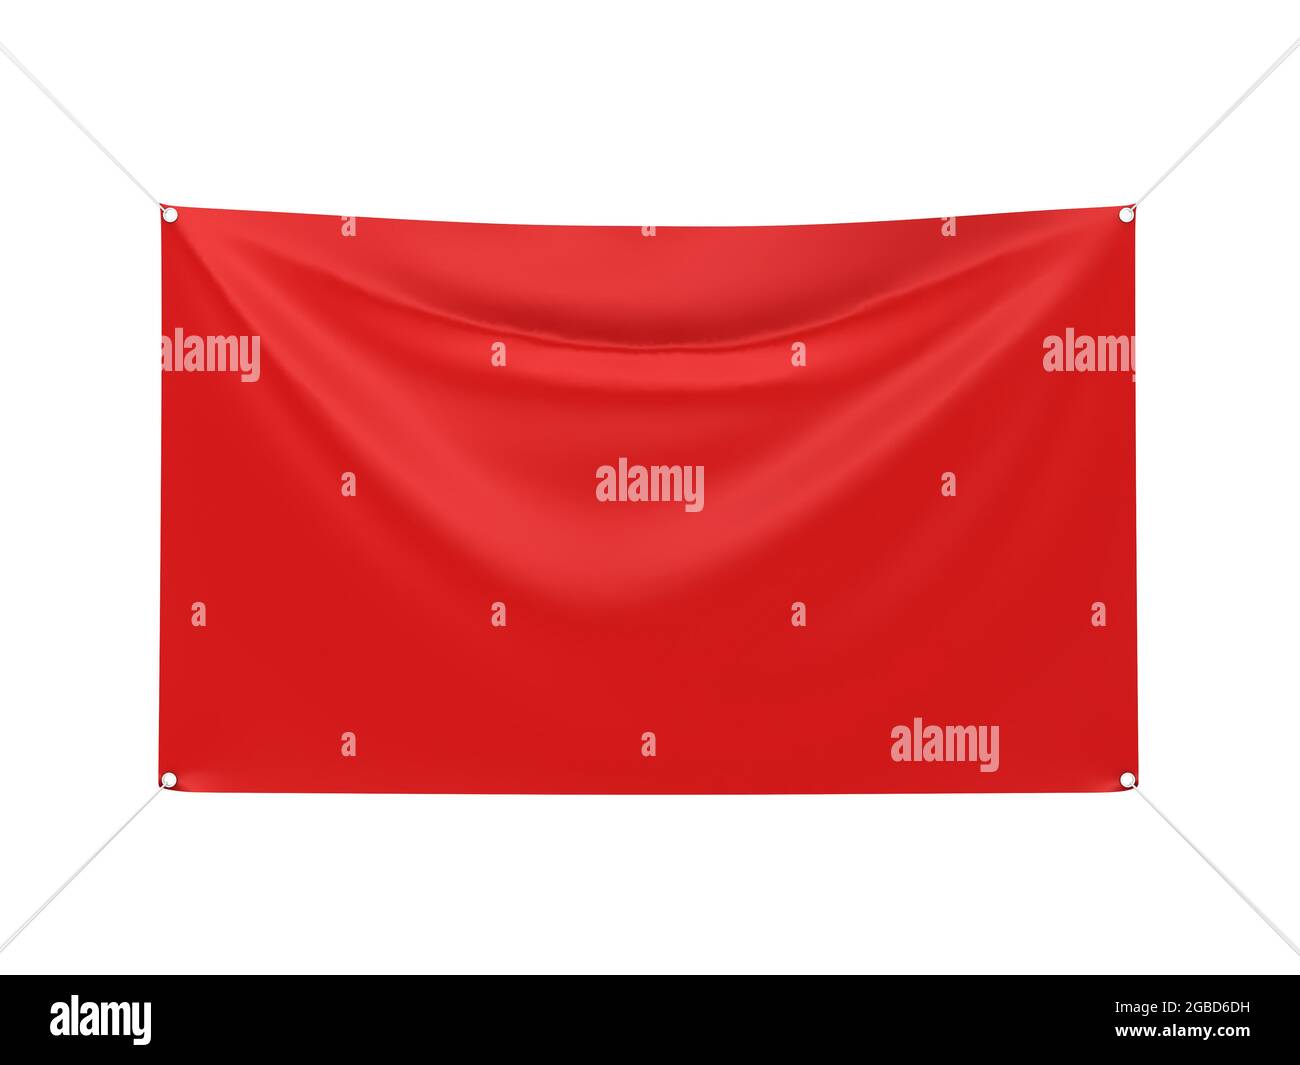 Flex banner Cut Out Stock Images & Pictures - Alamy